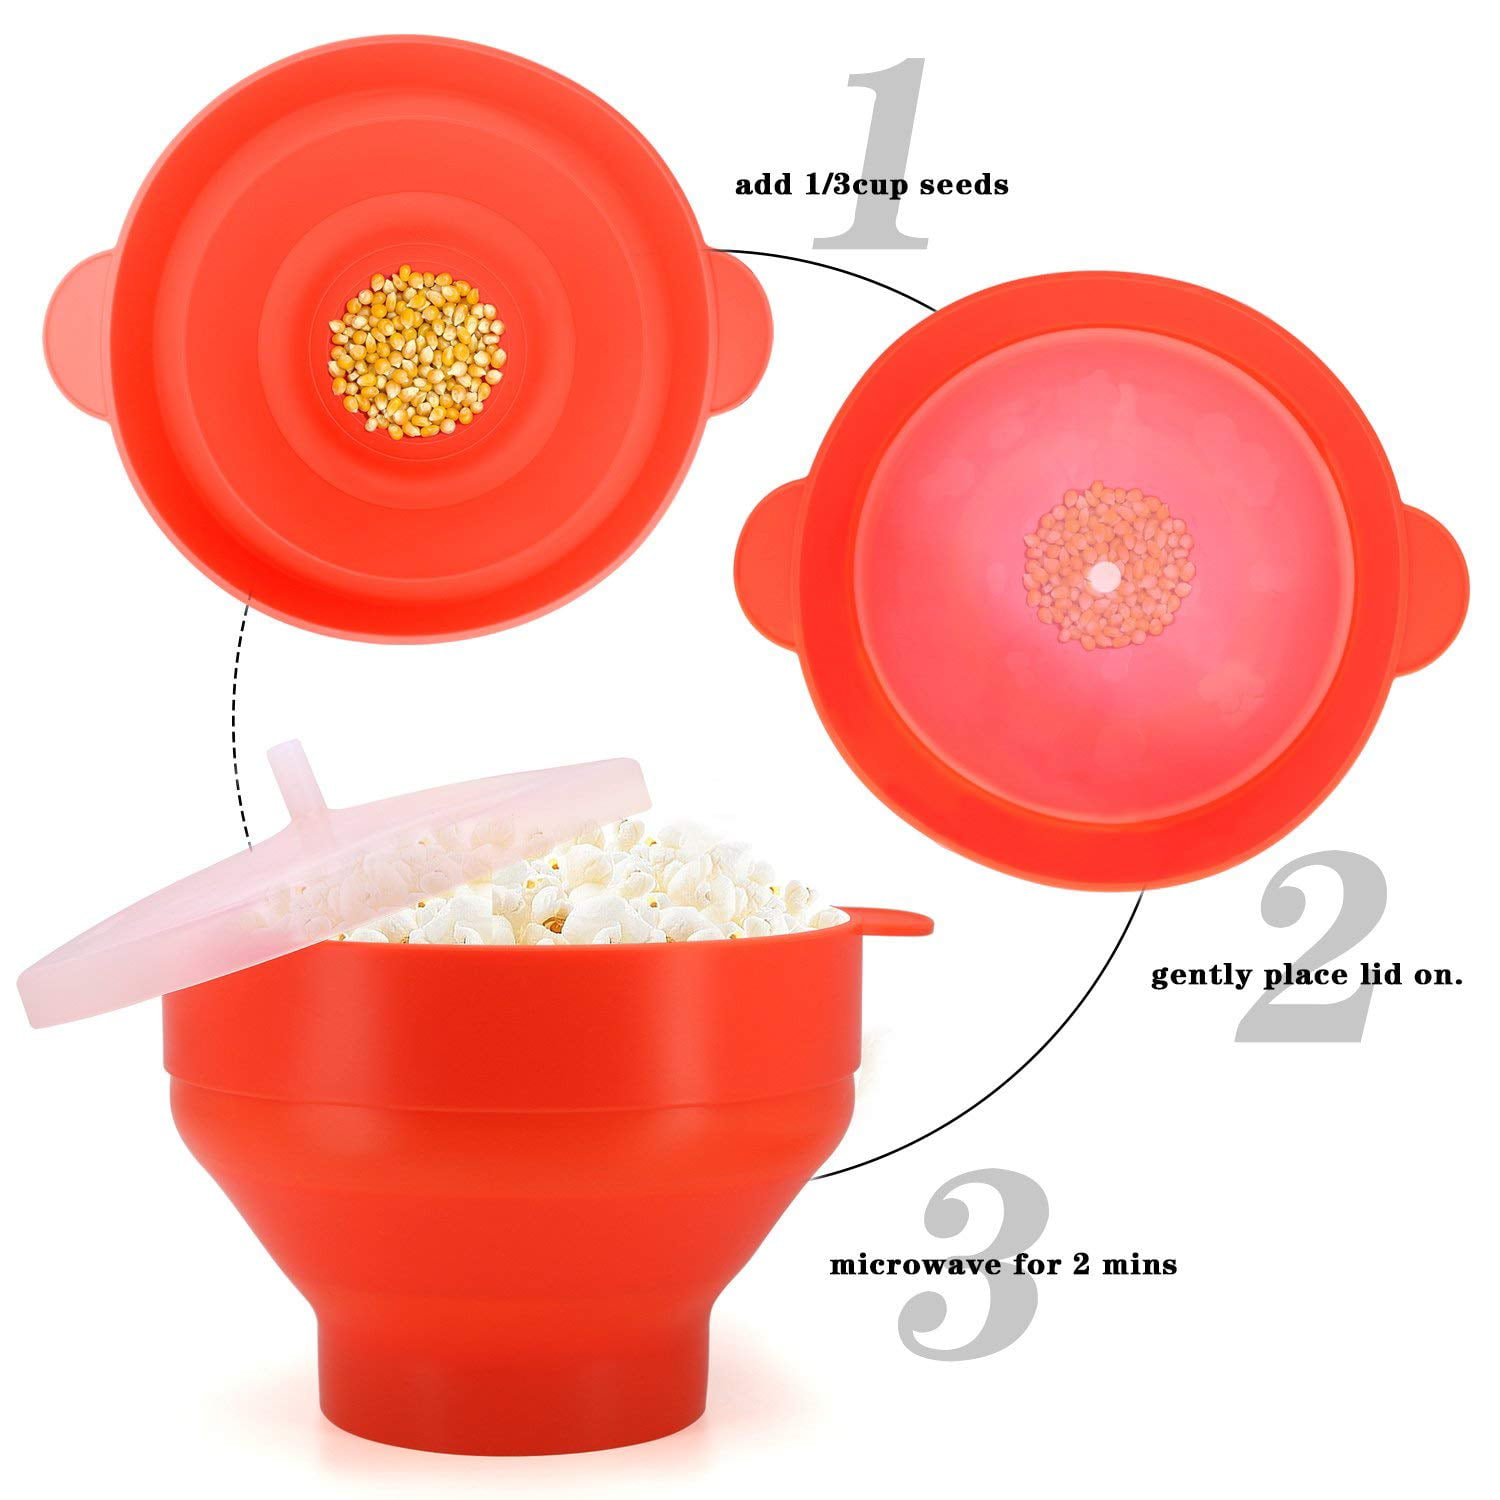 The Original Korcci Microwaveable Silicone Popcorn Popper Collapsible Microwave Popcorn Maker Bowl Aqua Various Colors Available BPA Free Microwave Popcorn Popper Dishwasher Safe 